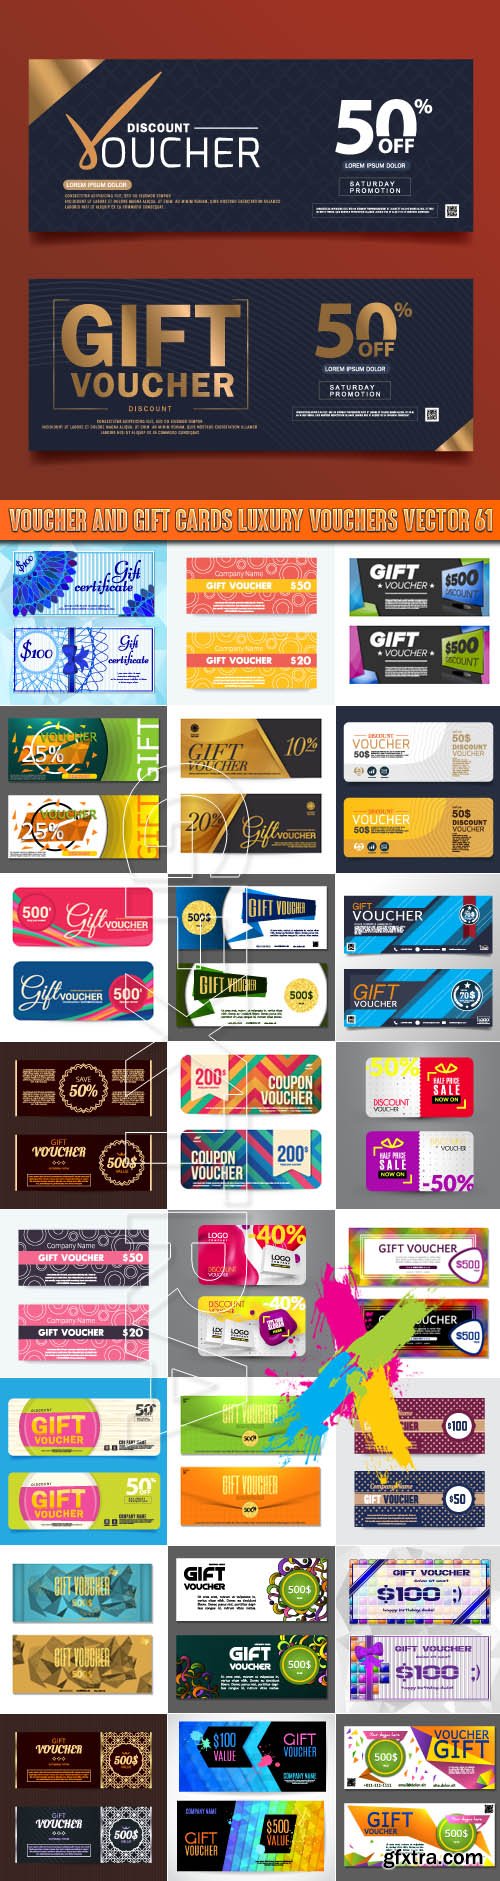 Voucher and gift cards luxury vouchers vector 61